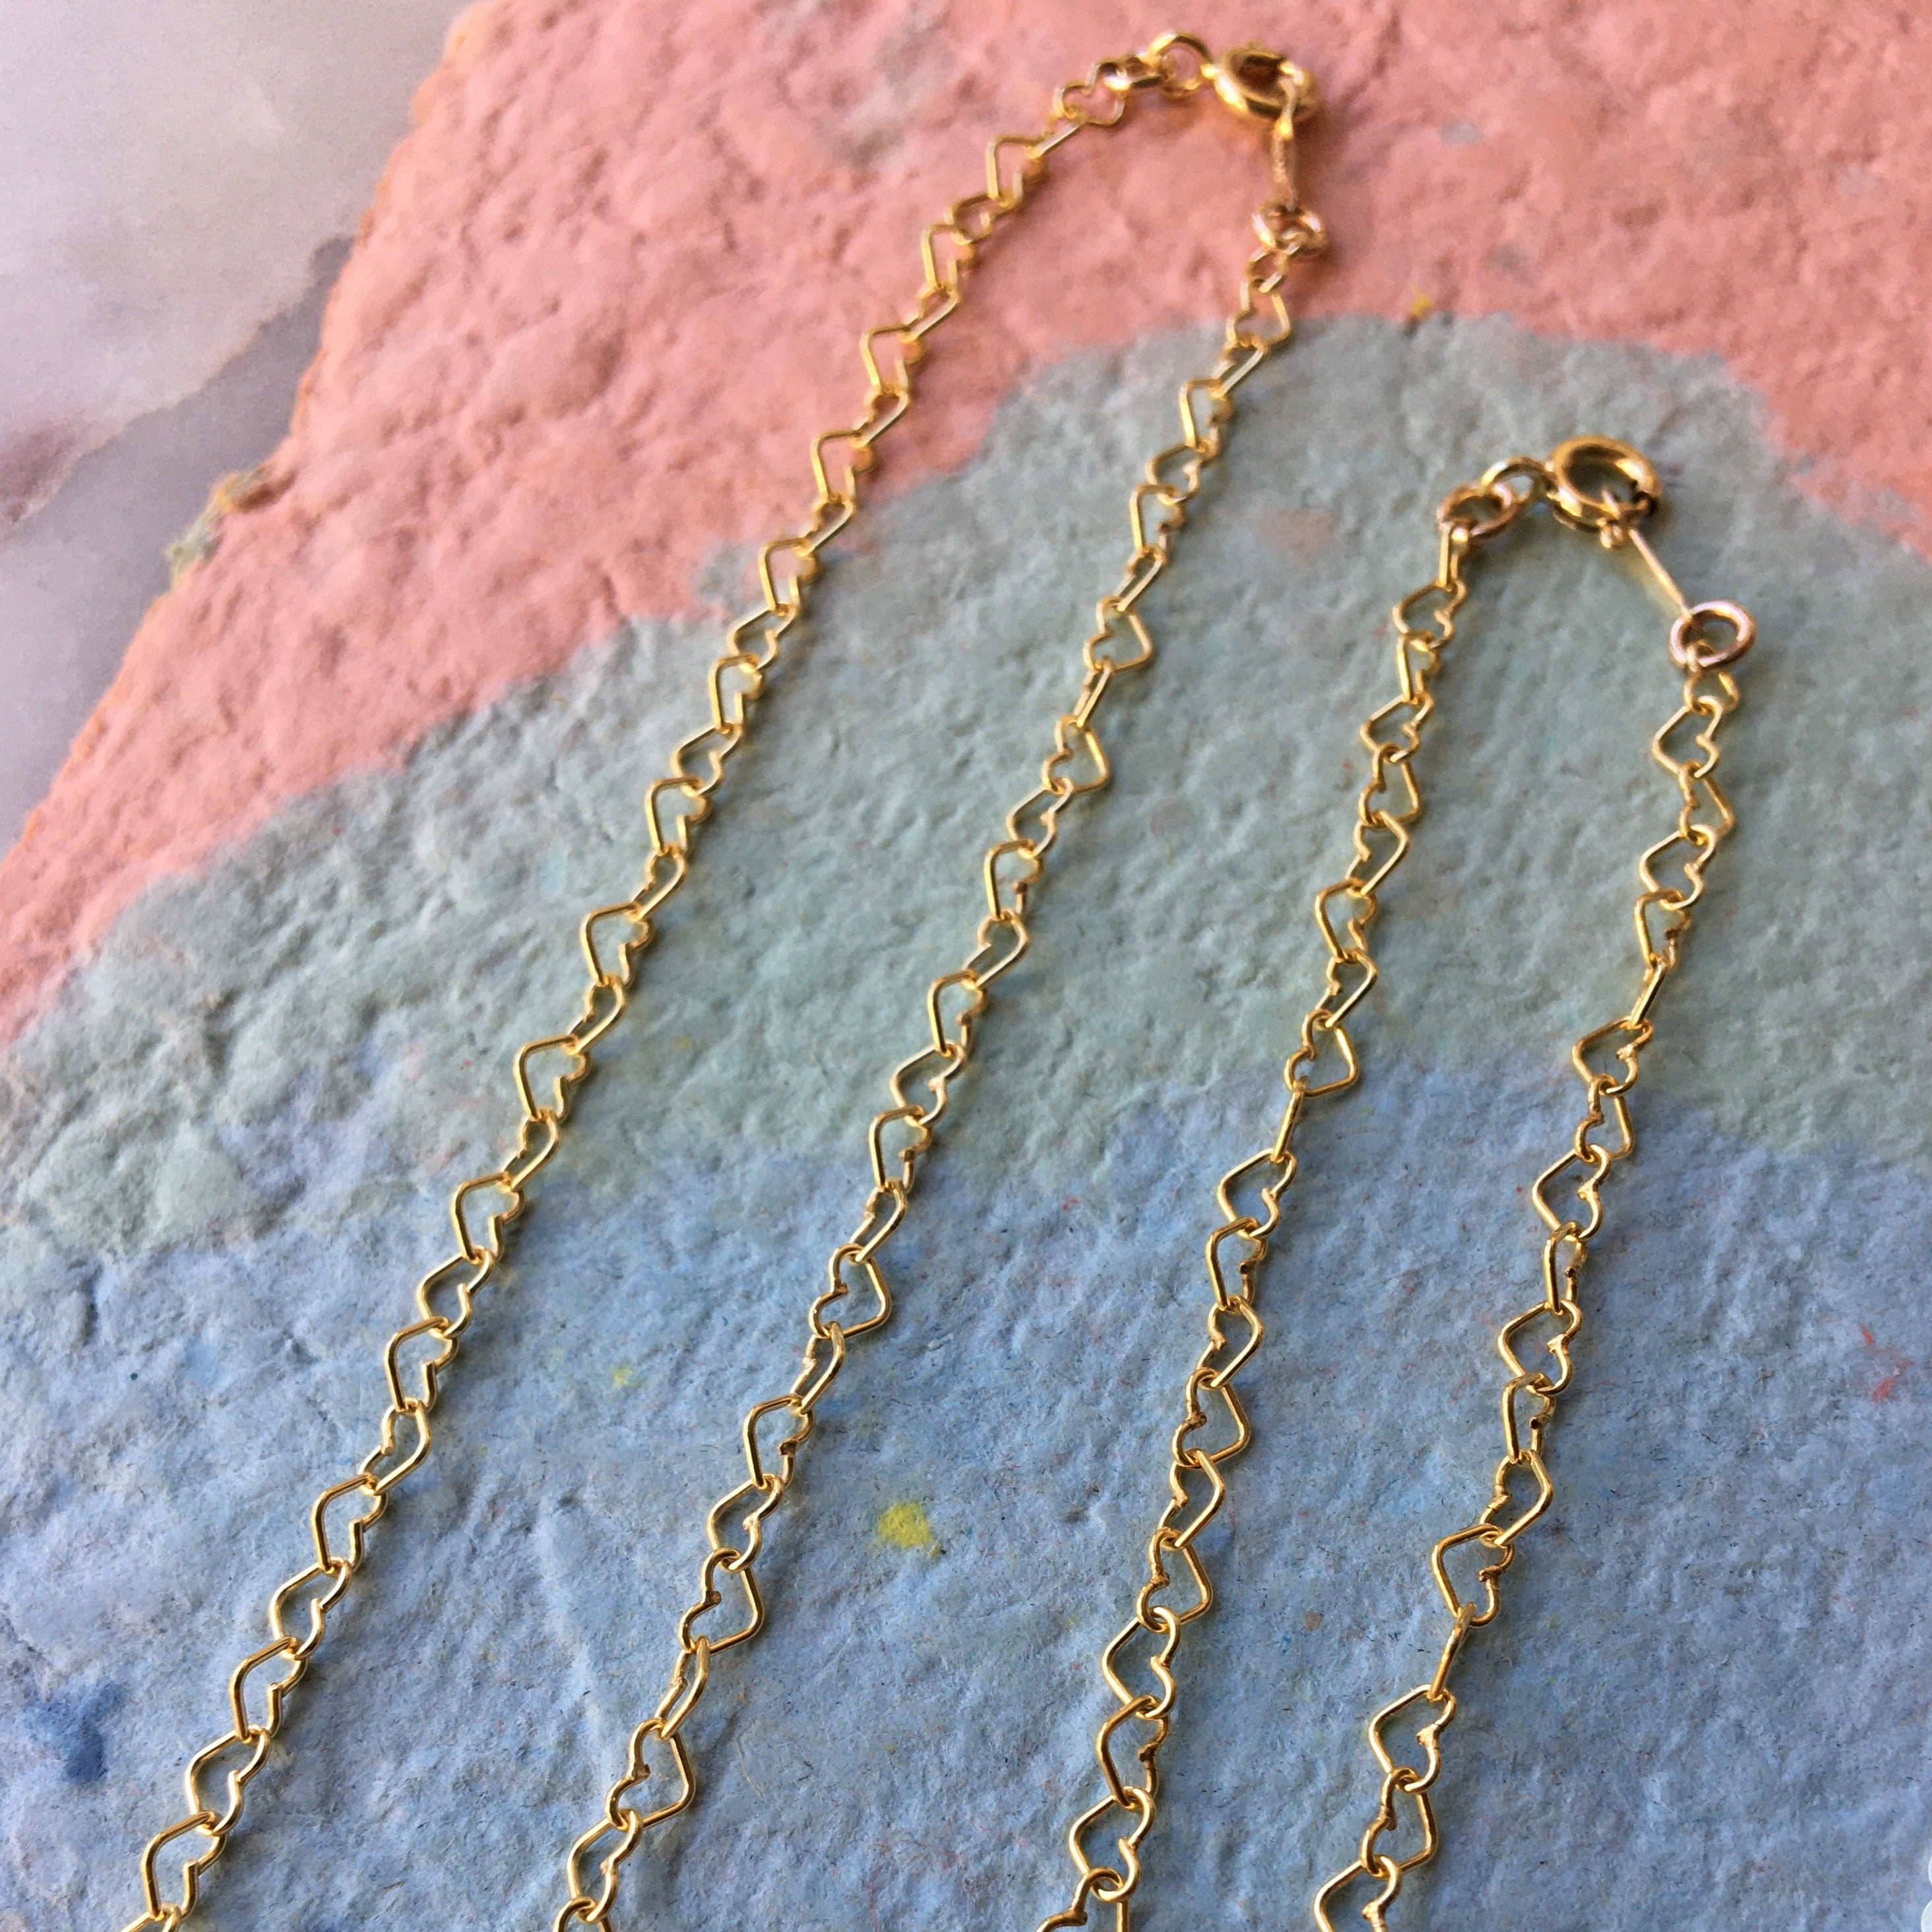 Chain Necklaces - gold fill